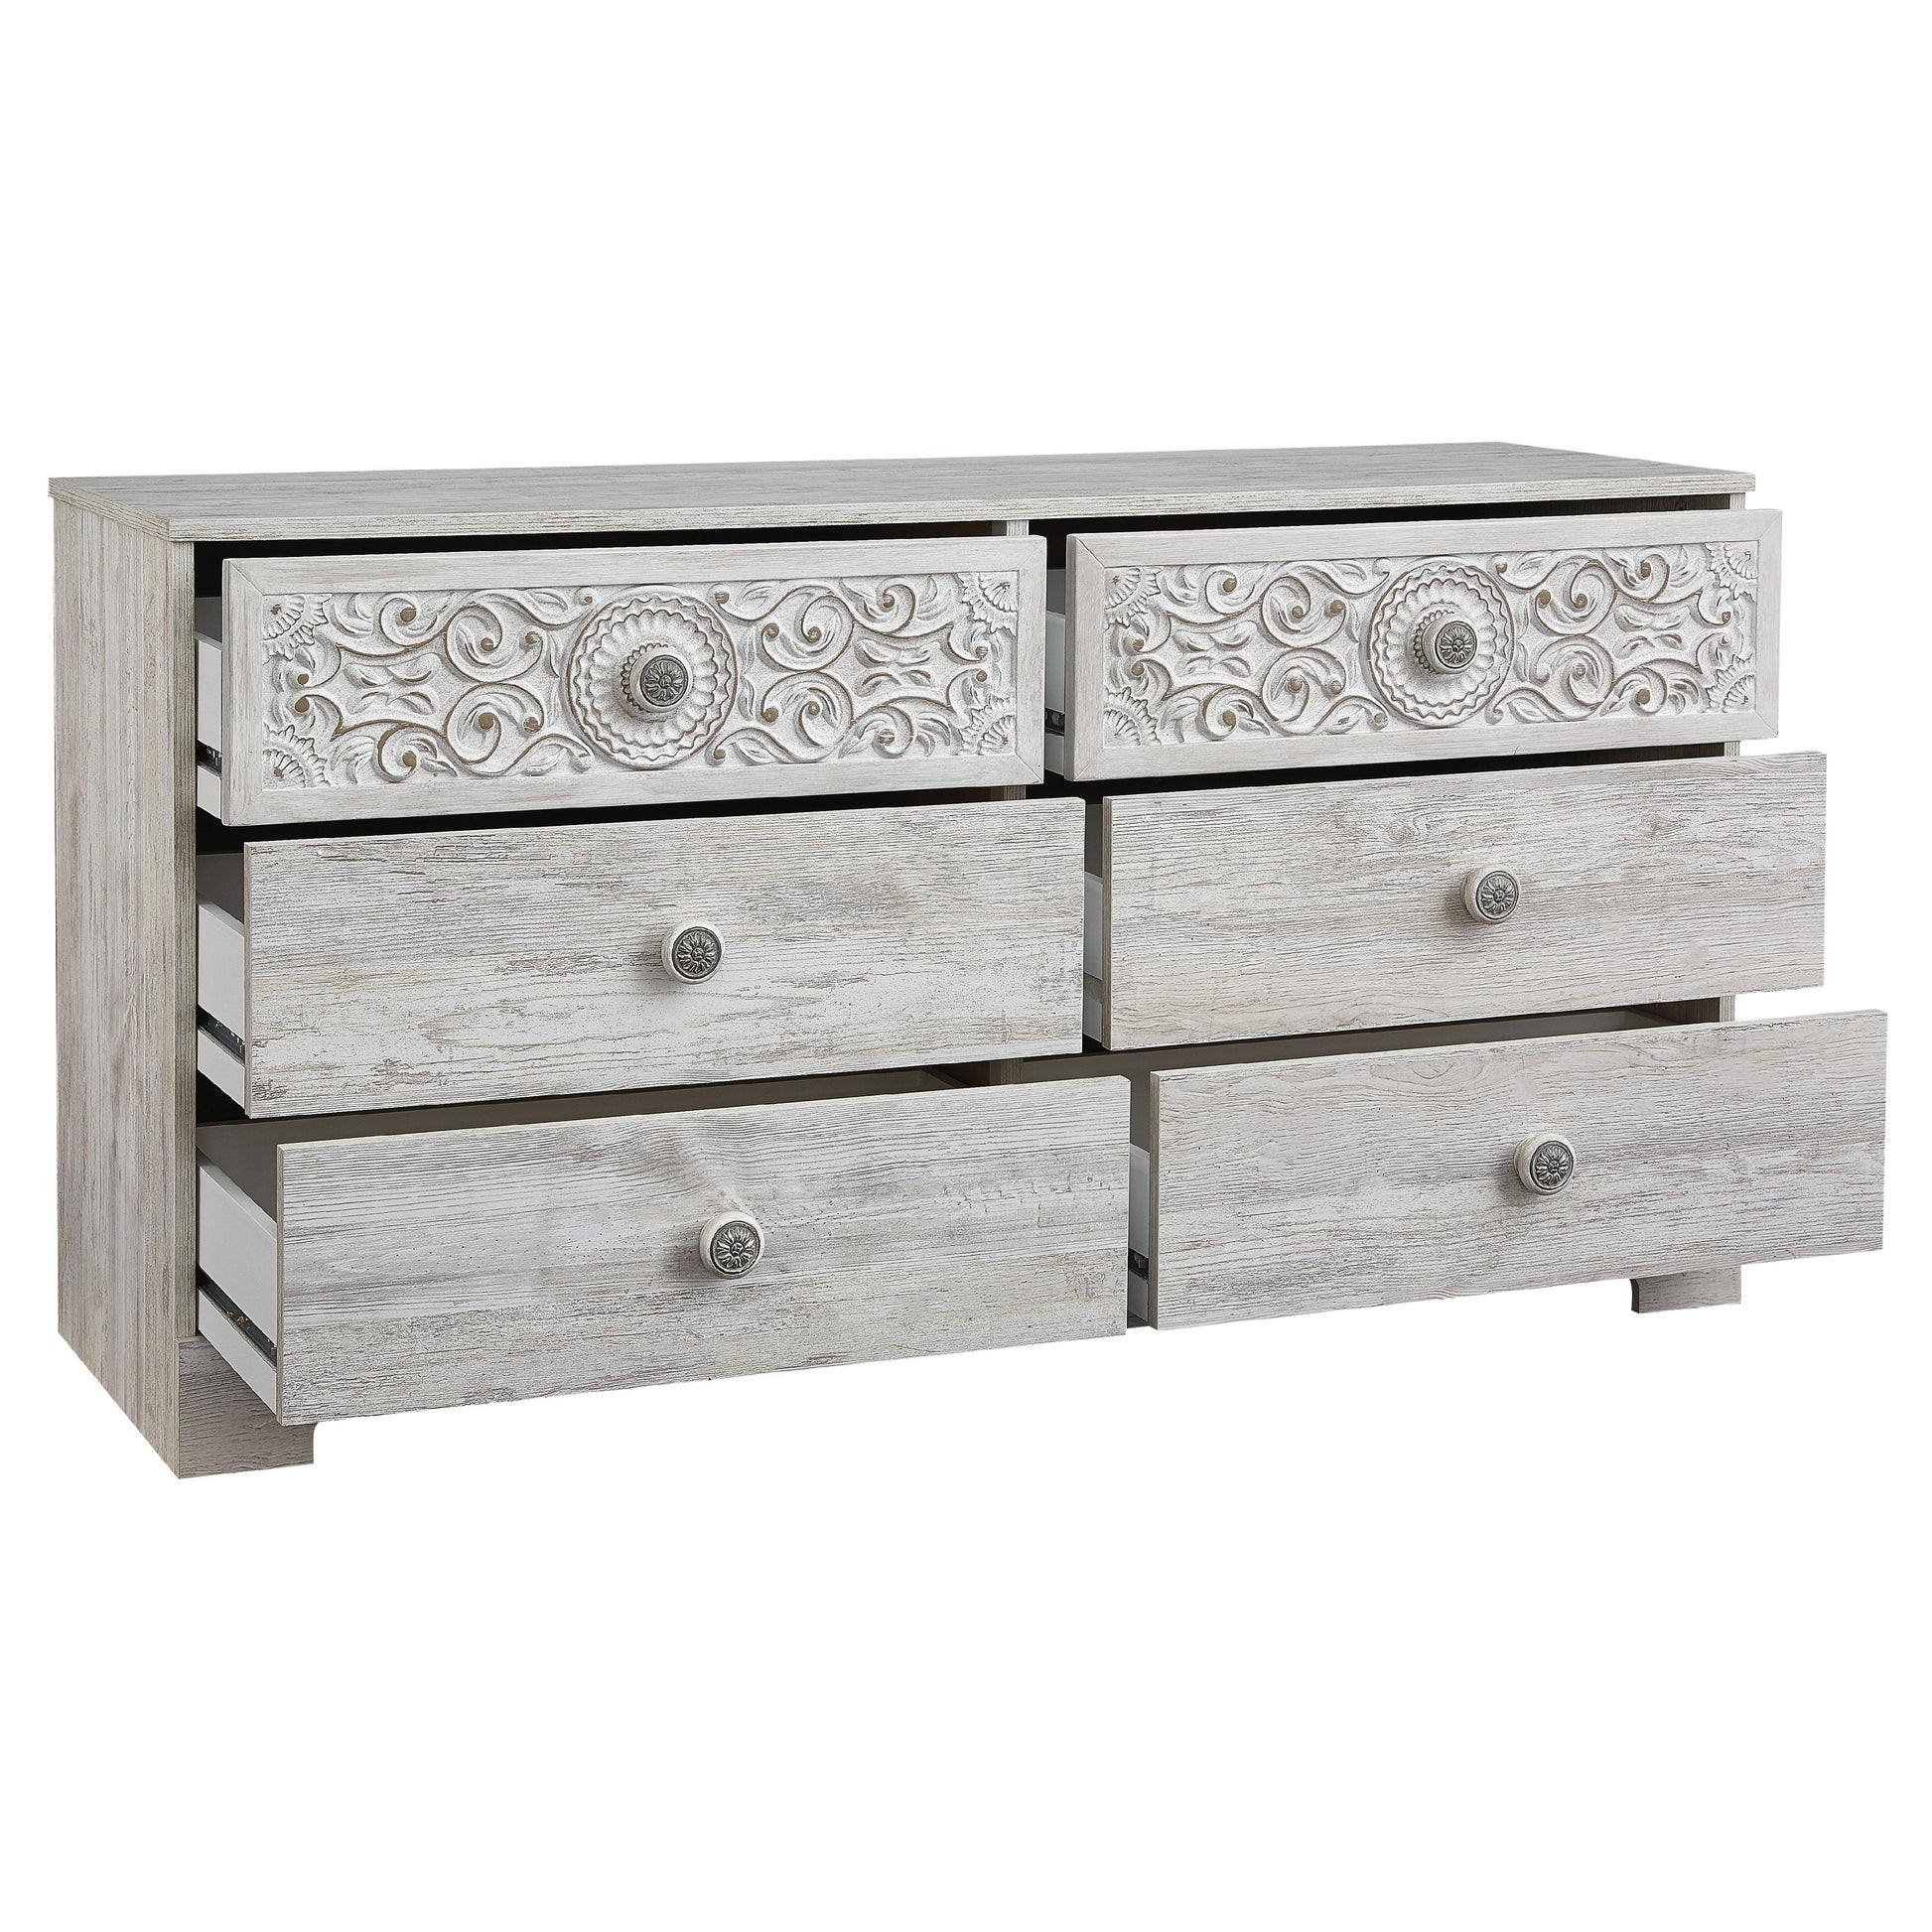 Signature Design by Ashley Paxberry 6-Drawer Dresser EB1811-231 IMAGE 2